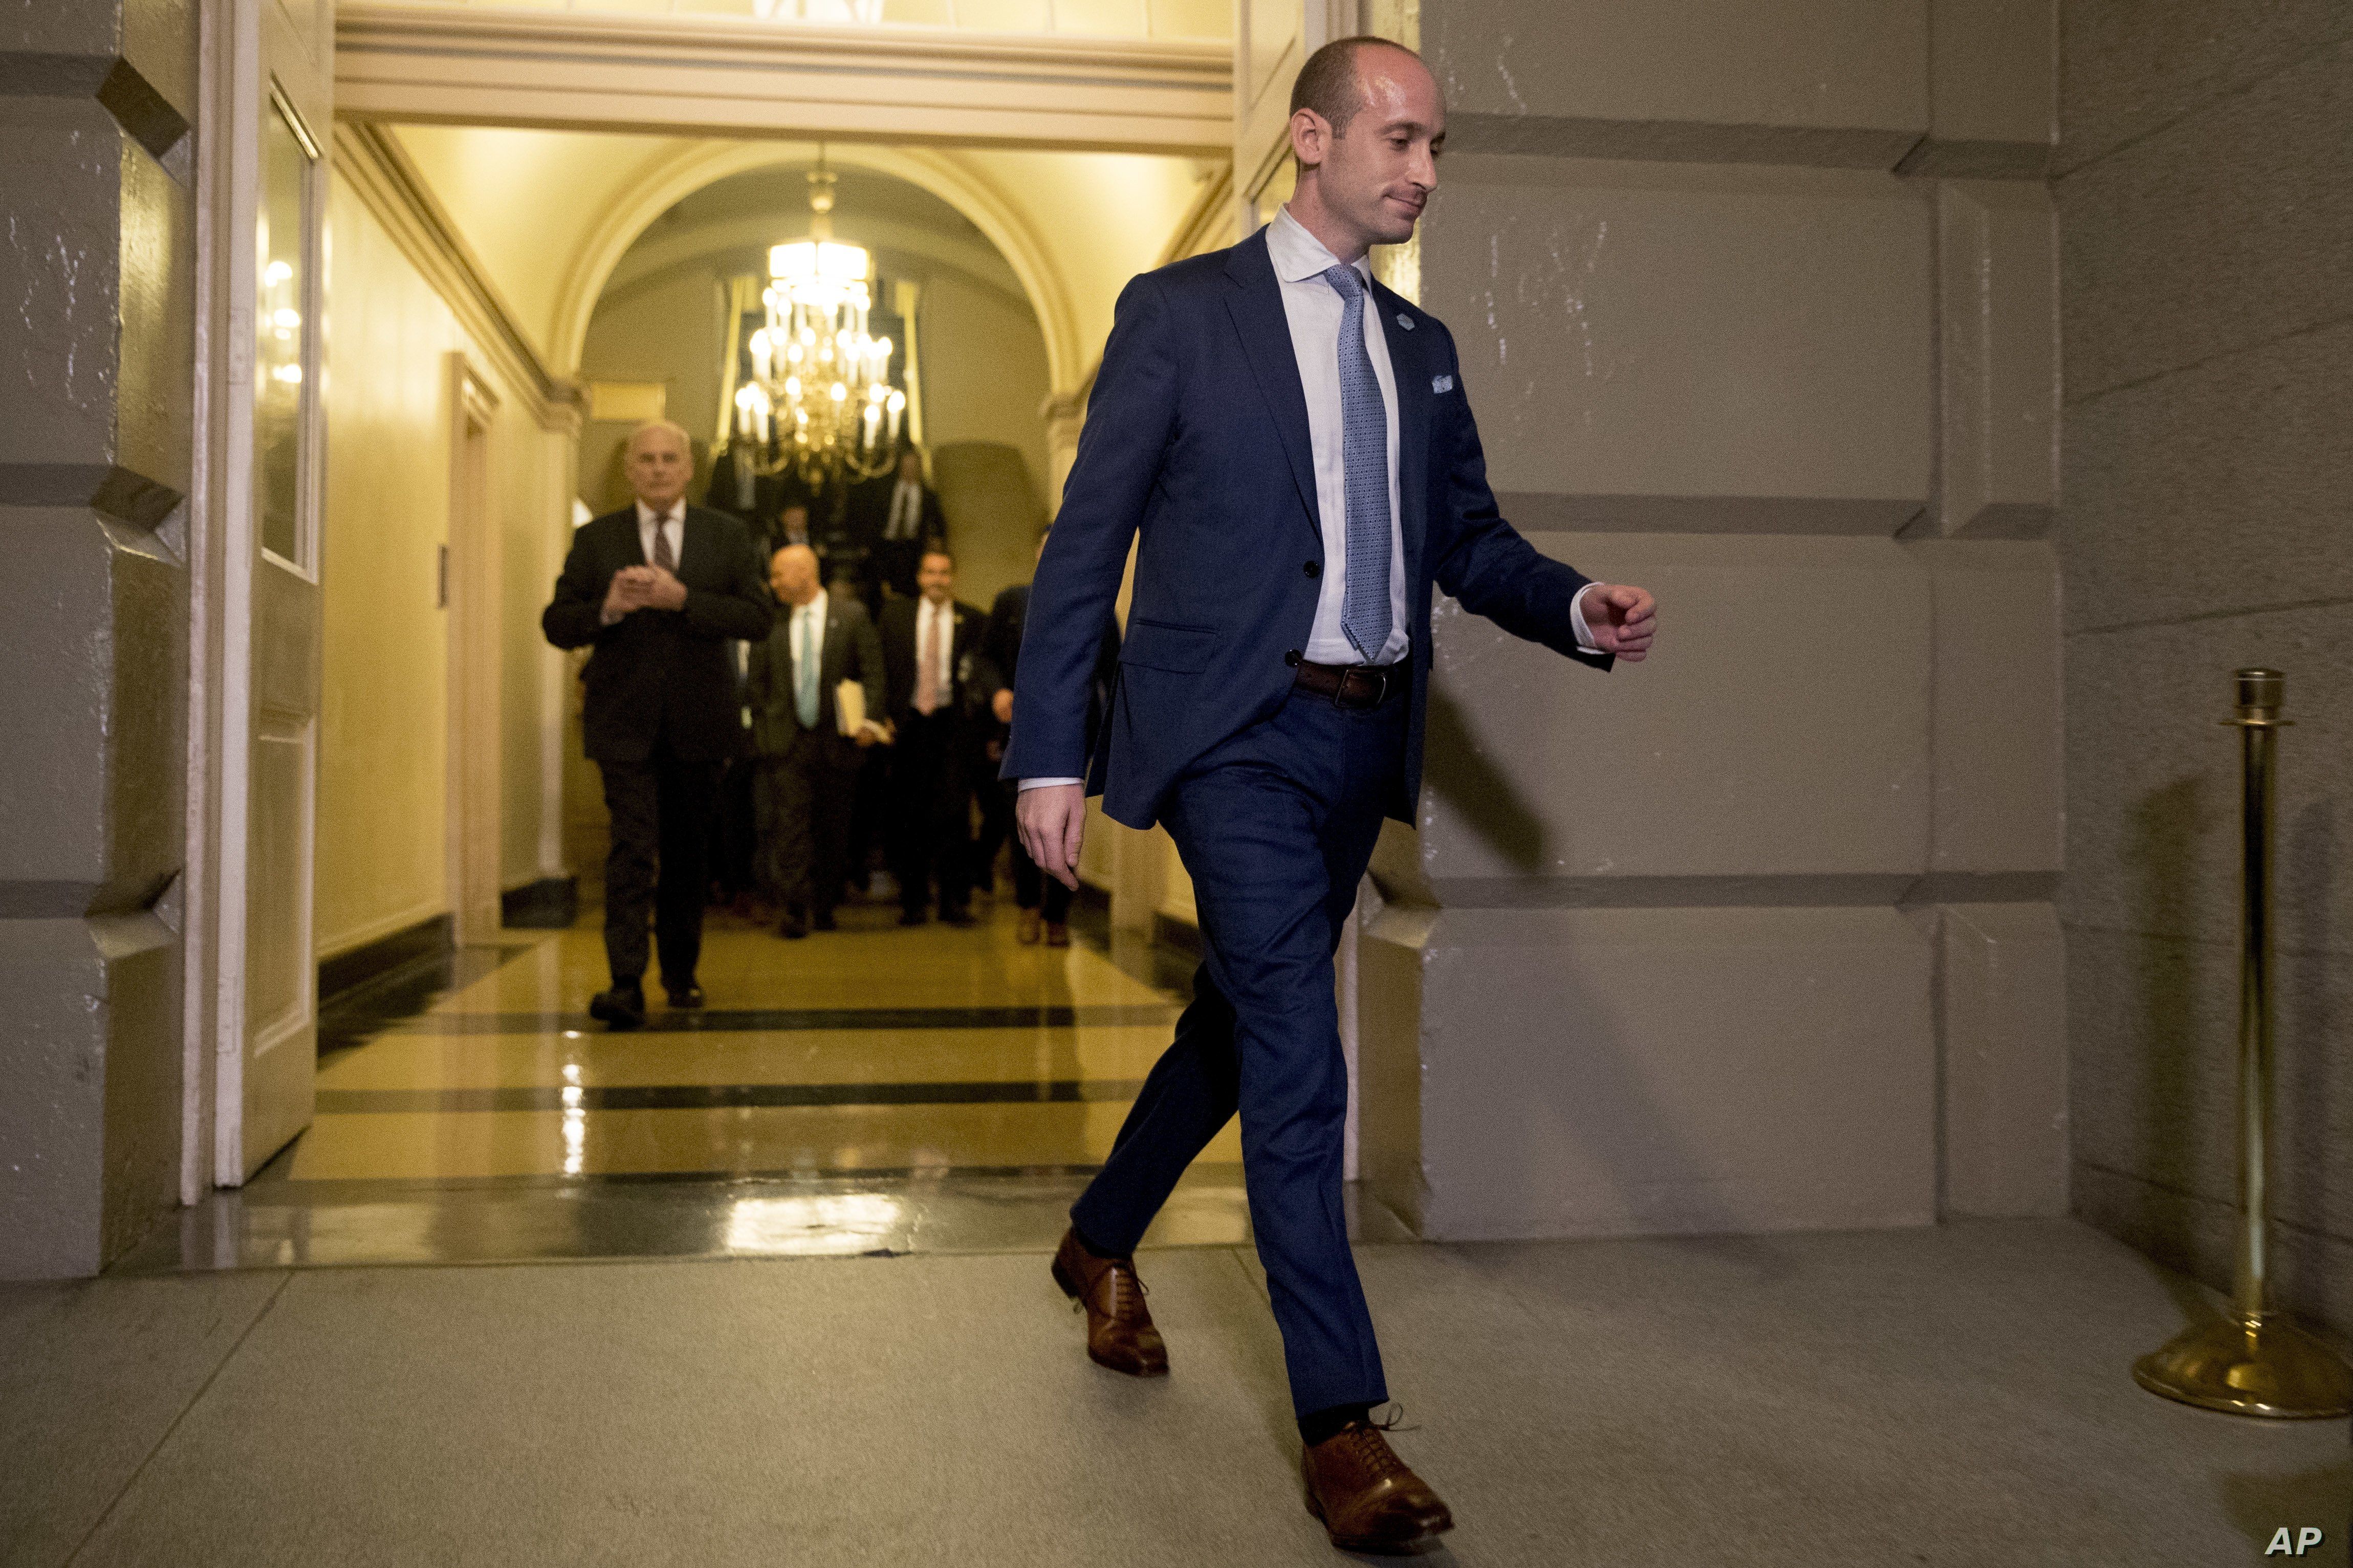 FILE - President Donald Trump's White House senior adviser Stephen Miller arrives for a meeting with Trump on Capitol Hill in Washington, June 19, 2018. Miller was called a 